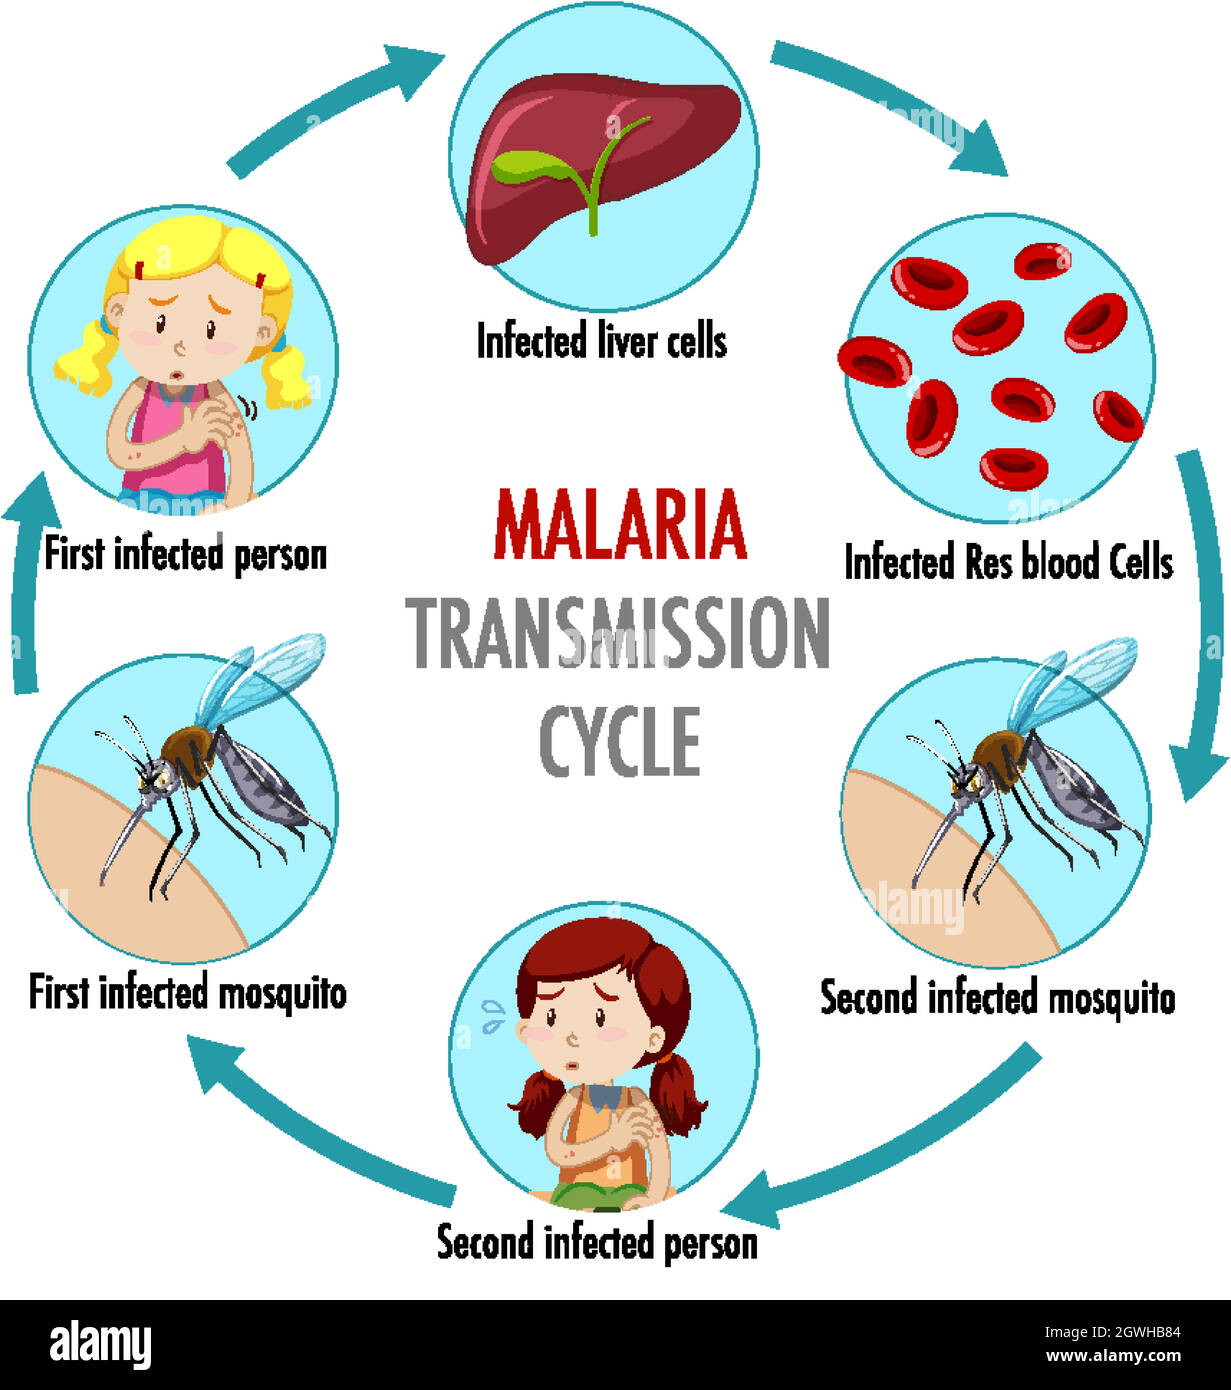 Malaria transmission cycle information infographic Stock Vector